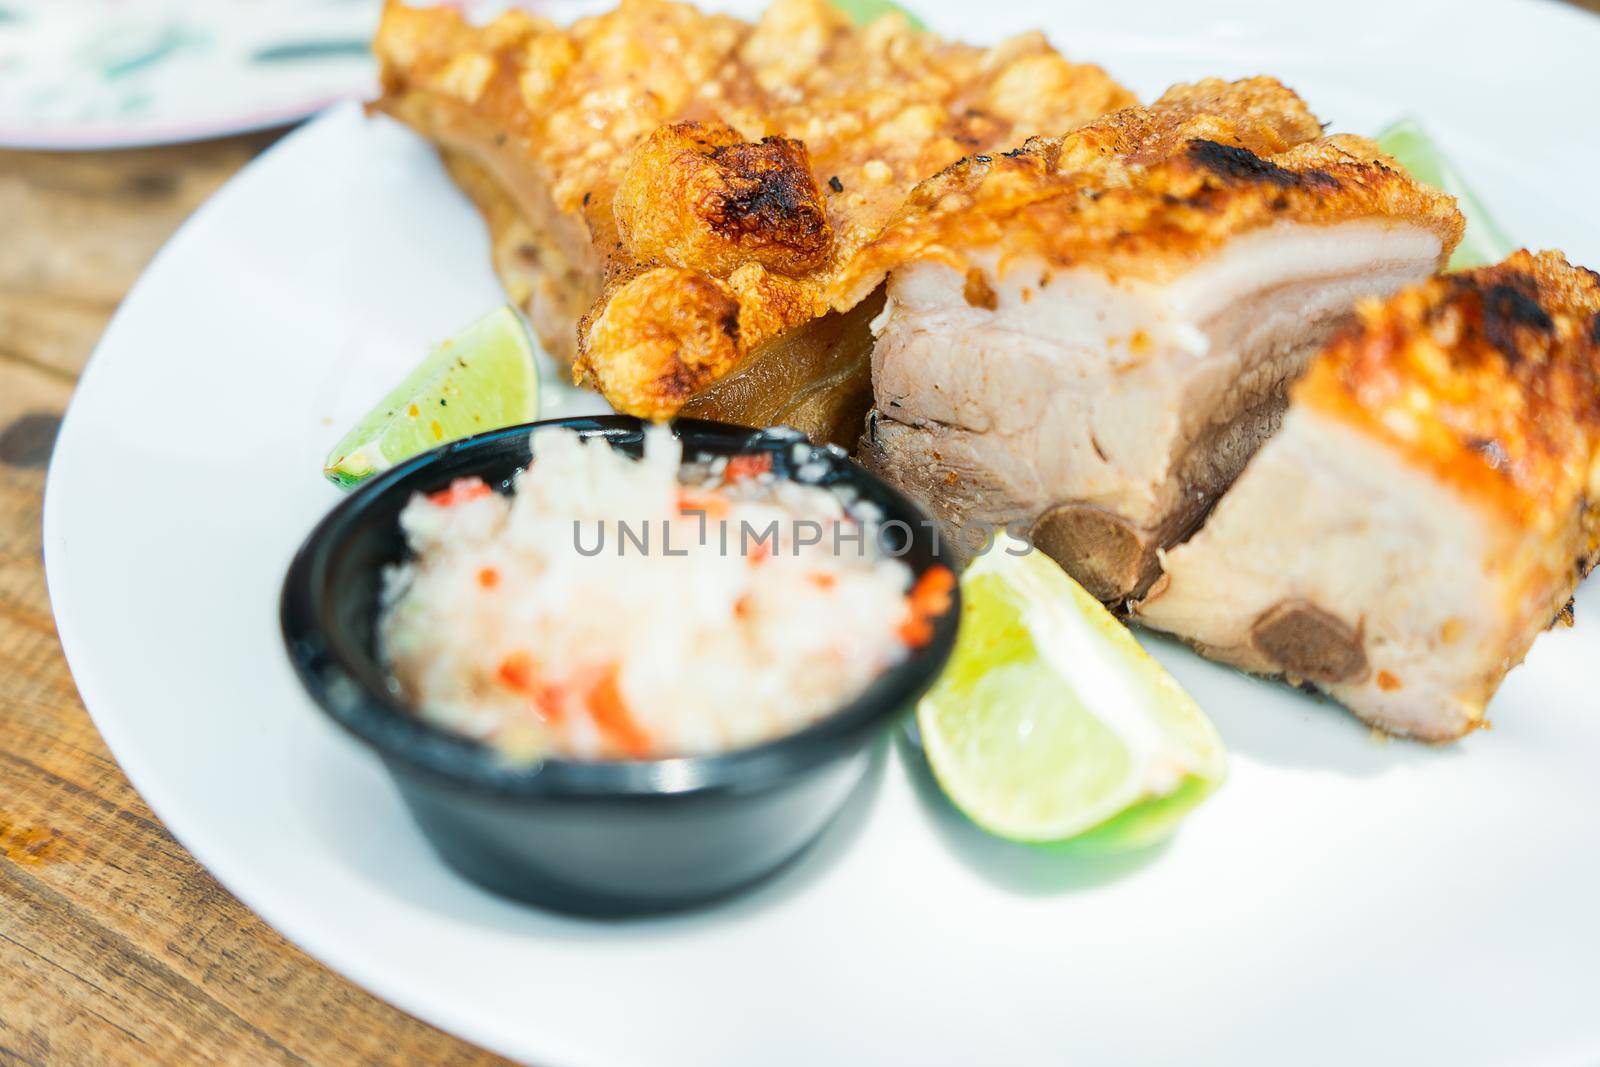 45 degree photo of a plate with lime fried pork shoulder and spicy onion salad. Traditional from Latin American by cfalvarez